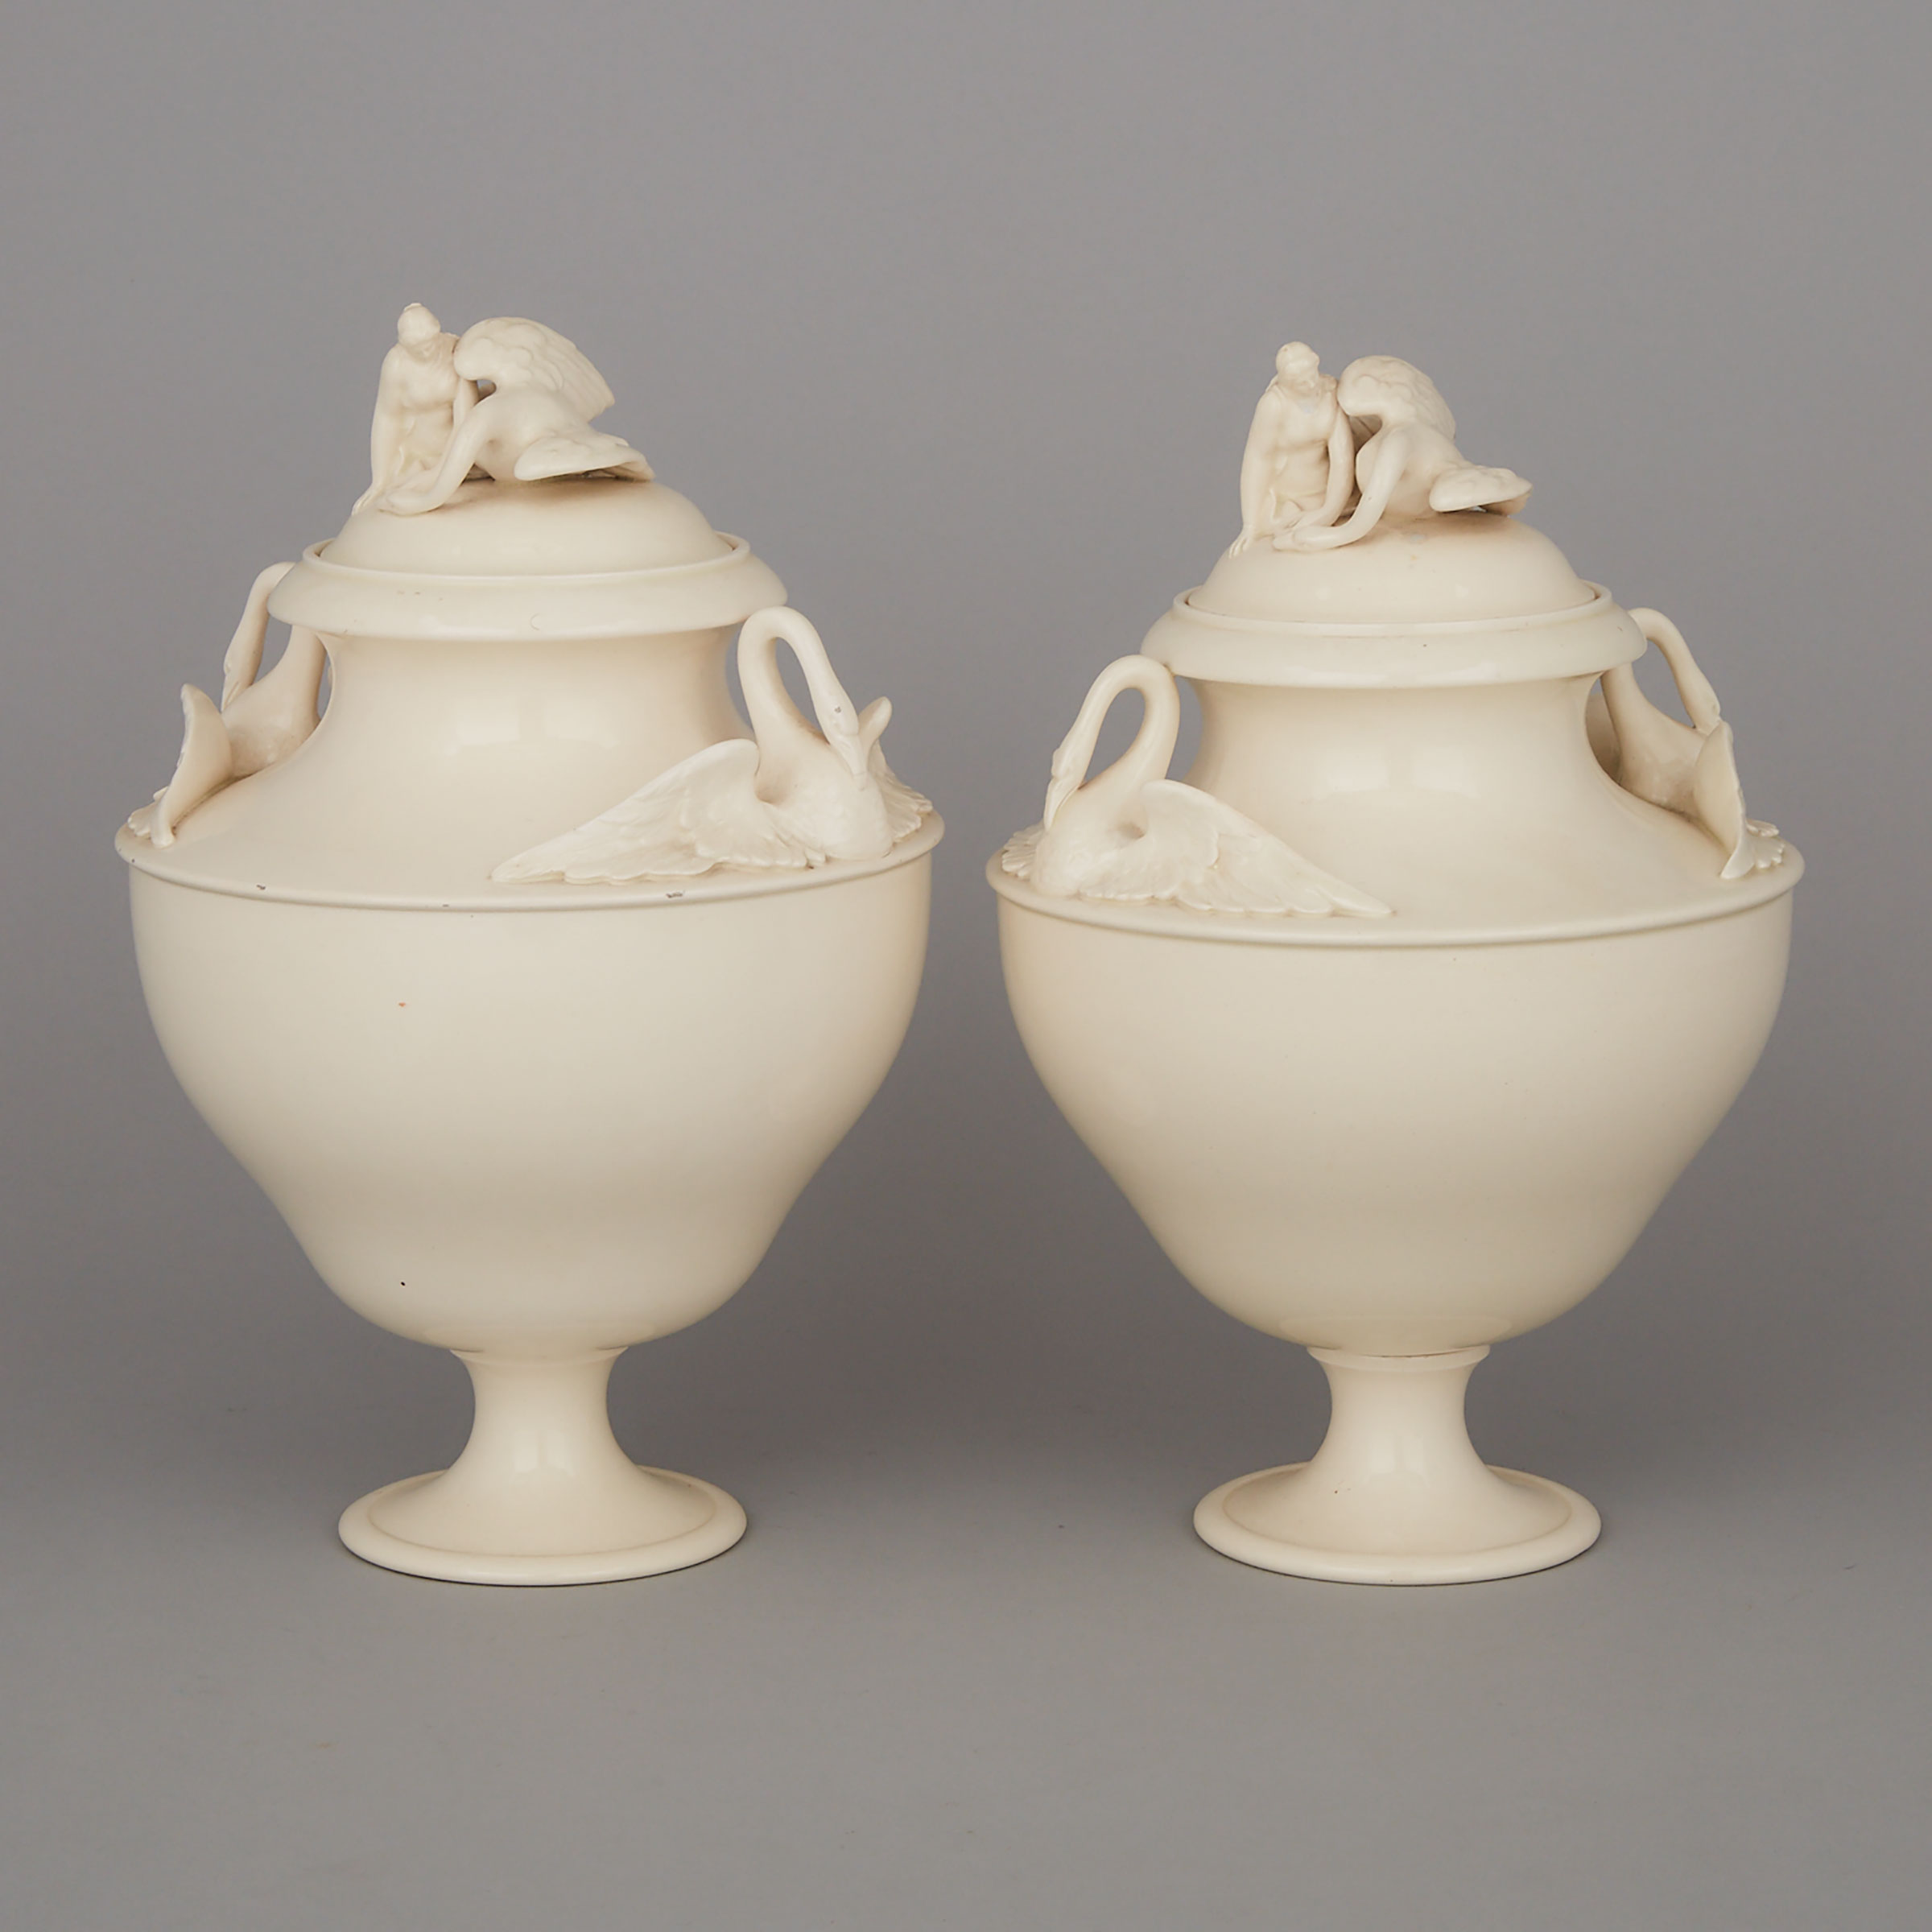 Pair of Wedgwood Queen’s Ware ‘Leda’ Vases and Covers, early 20th century